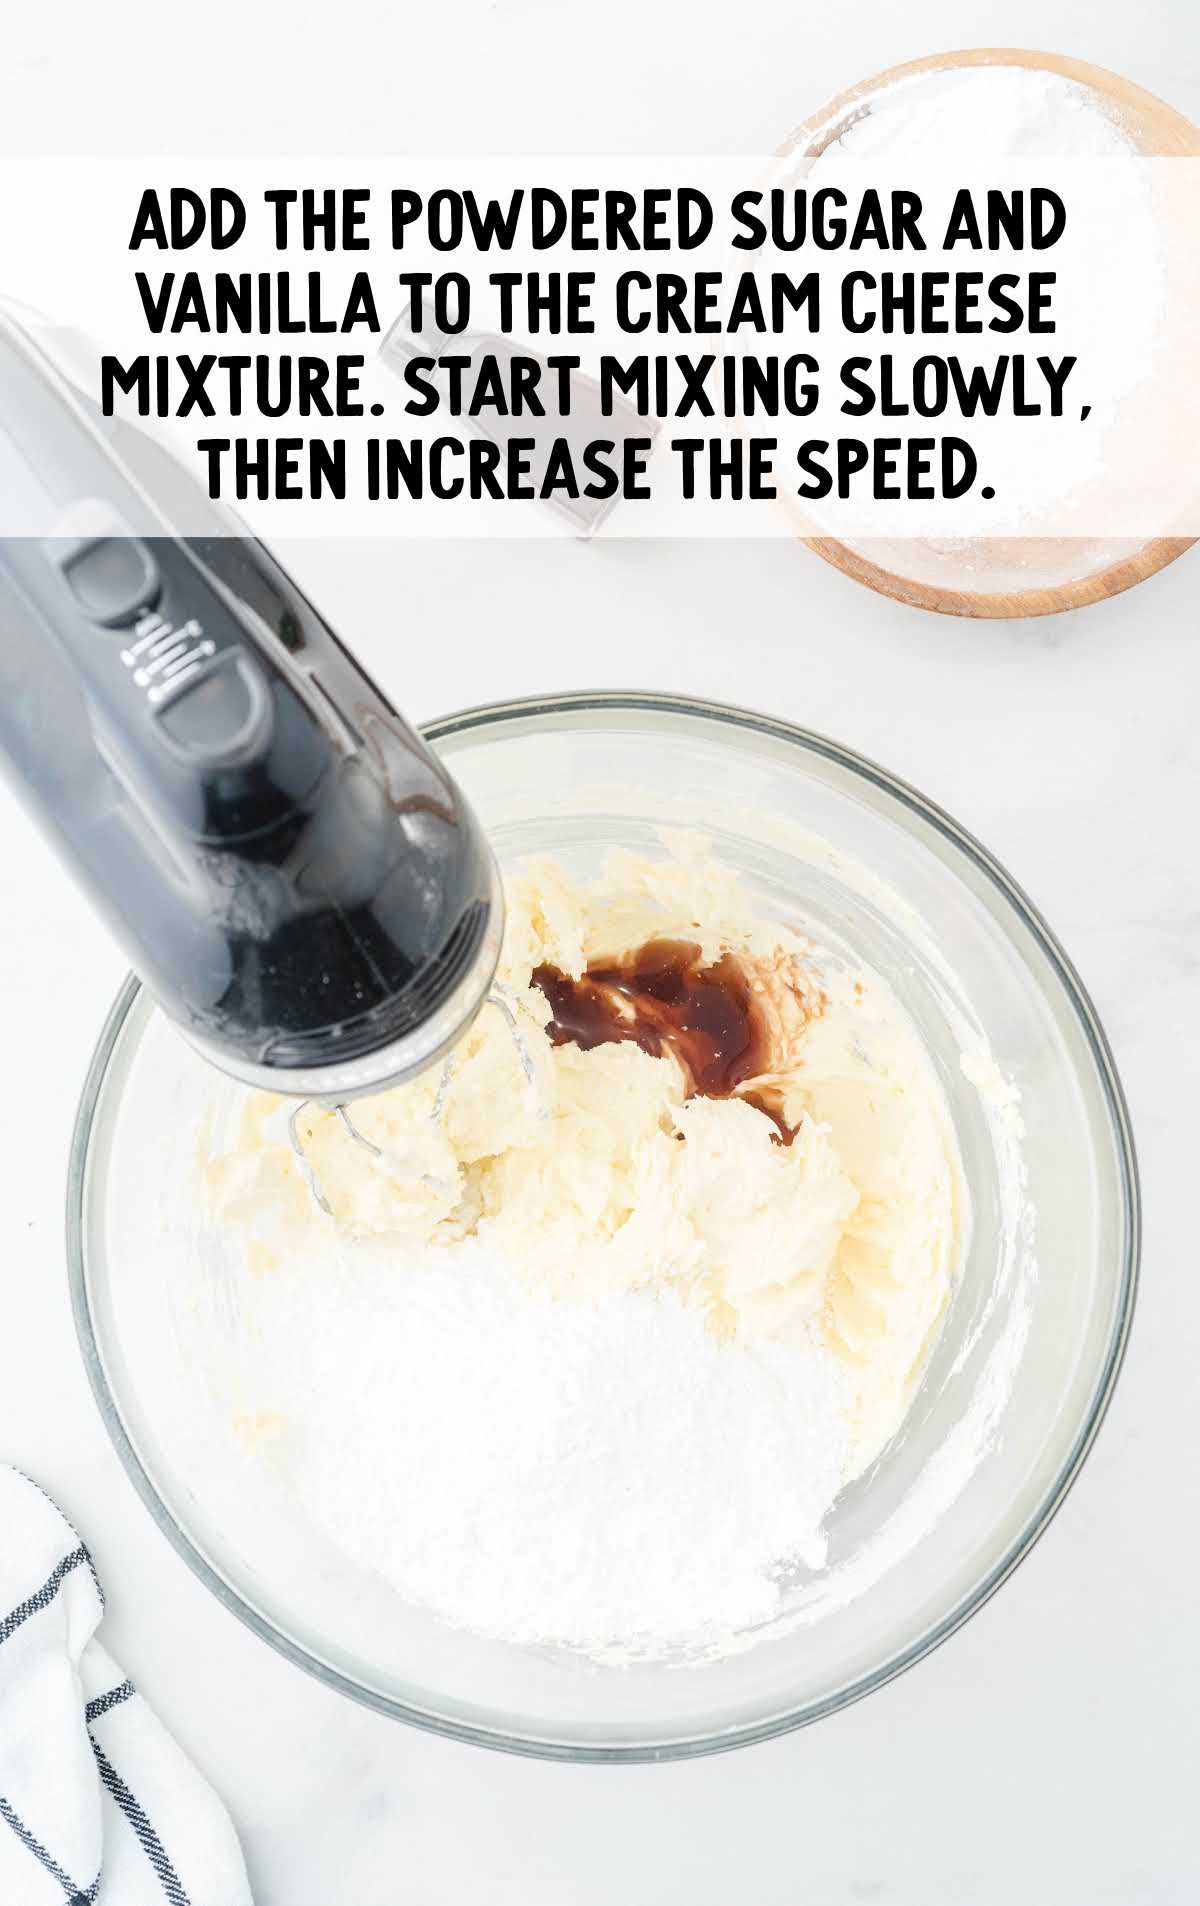 powdered sugar and vanilla blended into the cream cheese mixture